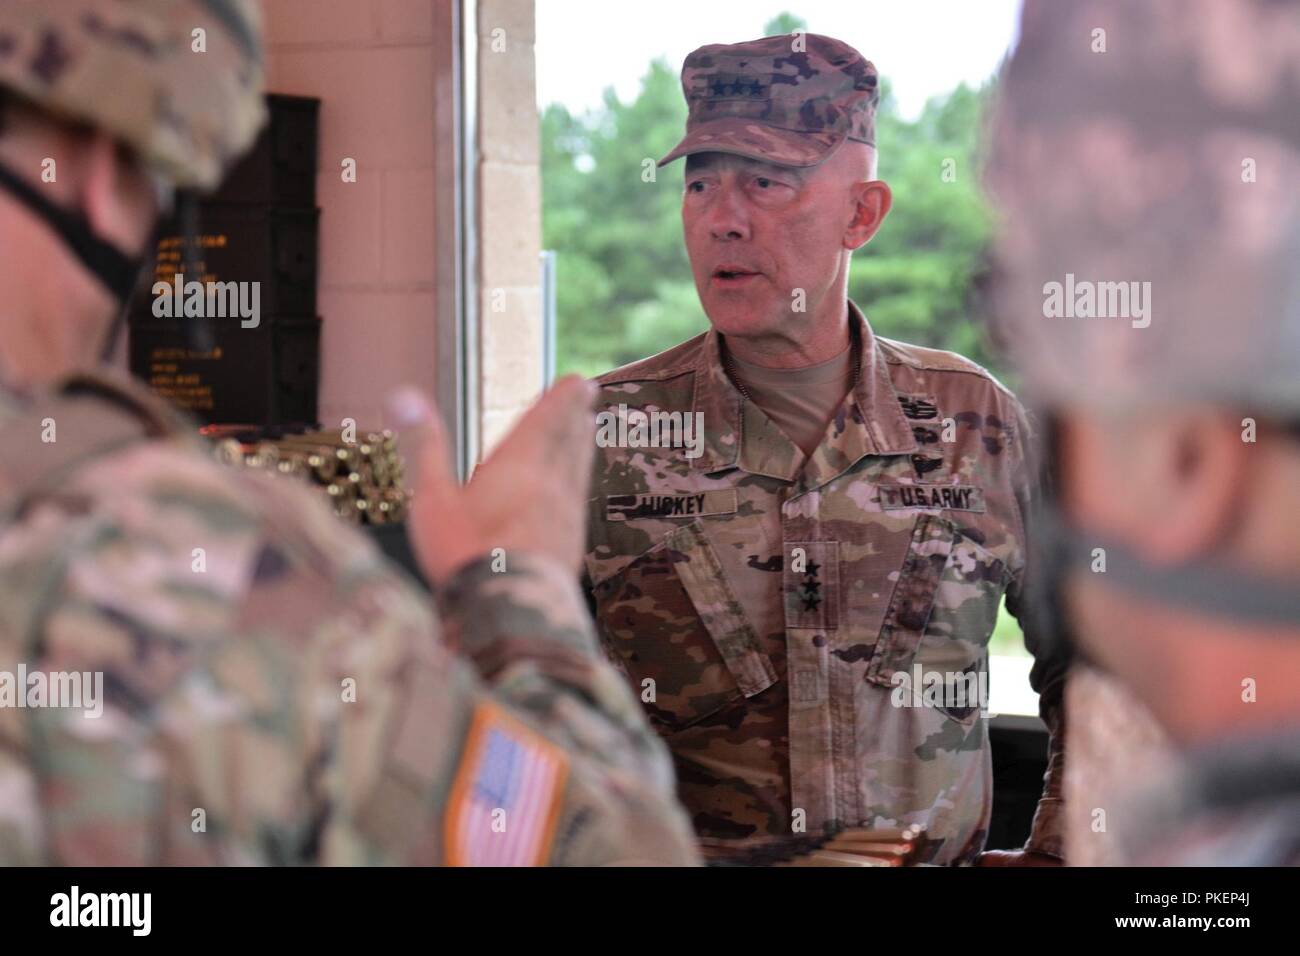 LTG Charles D. Luckey, Chief of Army Reserve and Commanding General, U.S. Army Reserve Command, views an ammunition point during Task Force Ultimate, Operation Cold Steel II, hosted by U.S. Army Civil Affairs and Psychological Operations Command (Airborne), July 25, 2018 at Joint Base McGuire-Dix-Lakehurst, N.J. Operation Cold Steel is the U.S. Army Reserve's crew-served weapons qualification and validation exercise to ensure America's Army Reserve units and Soldiers are trained and ready to deploy on short notice as part of Ready Force X and bring combat-ready and lethal firepower in support  Stock Photo